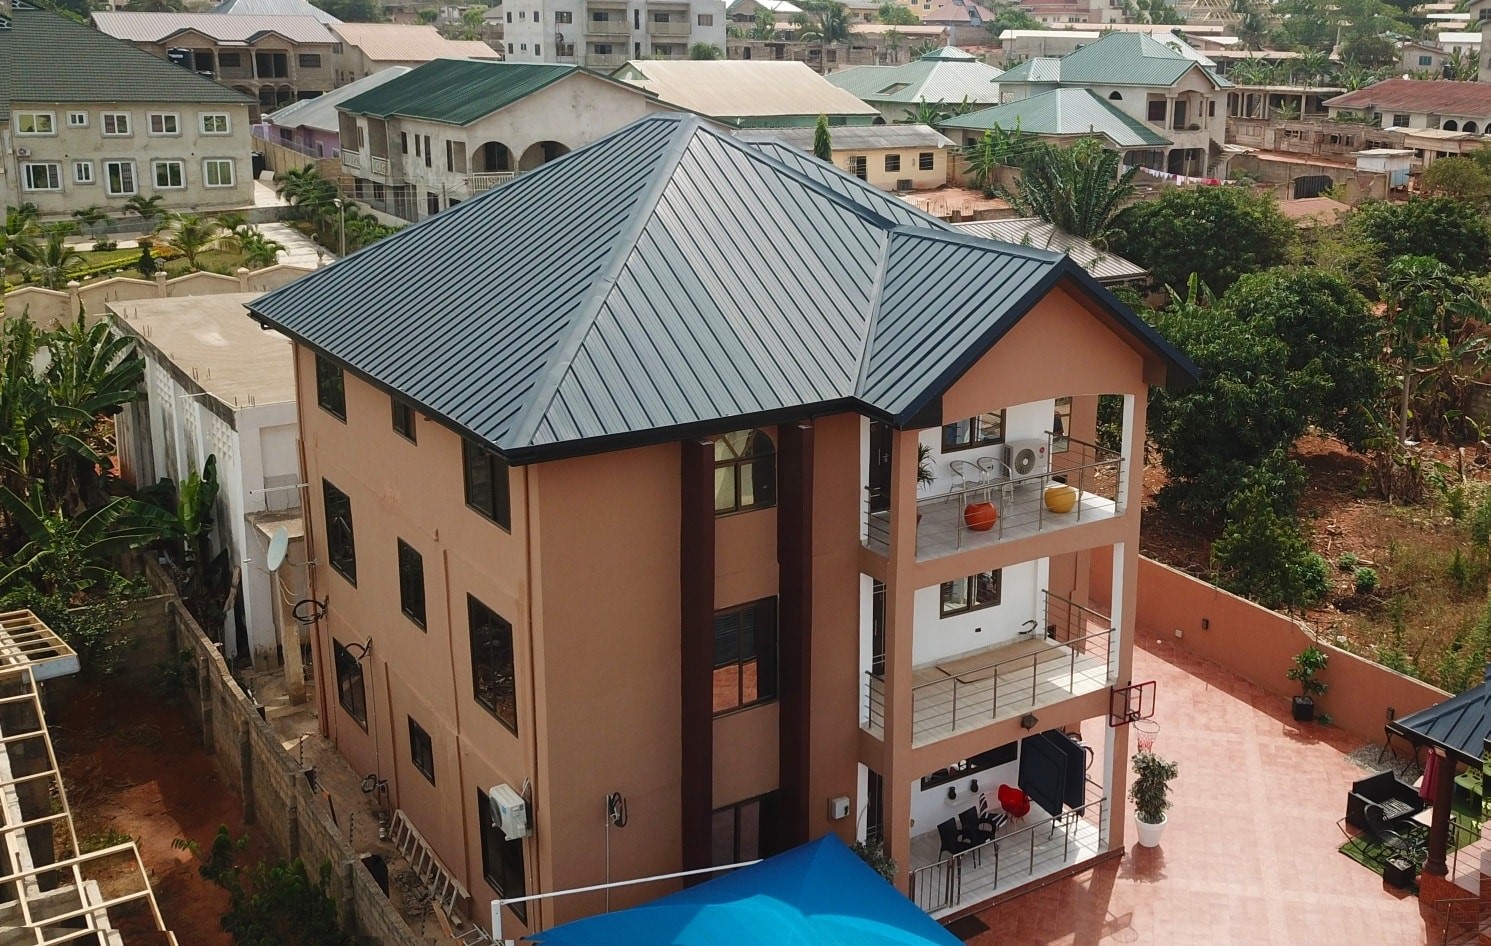 FACTORS TO CONSIDER WHEN CHOOSING A SUITABLE ROOFING MATERIAL FOR YOUR HOME.